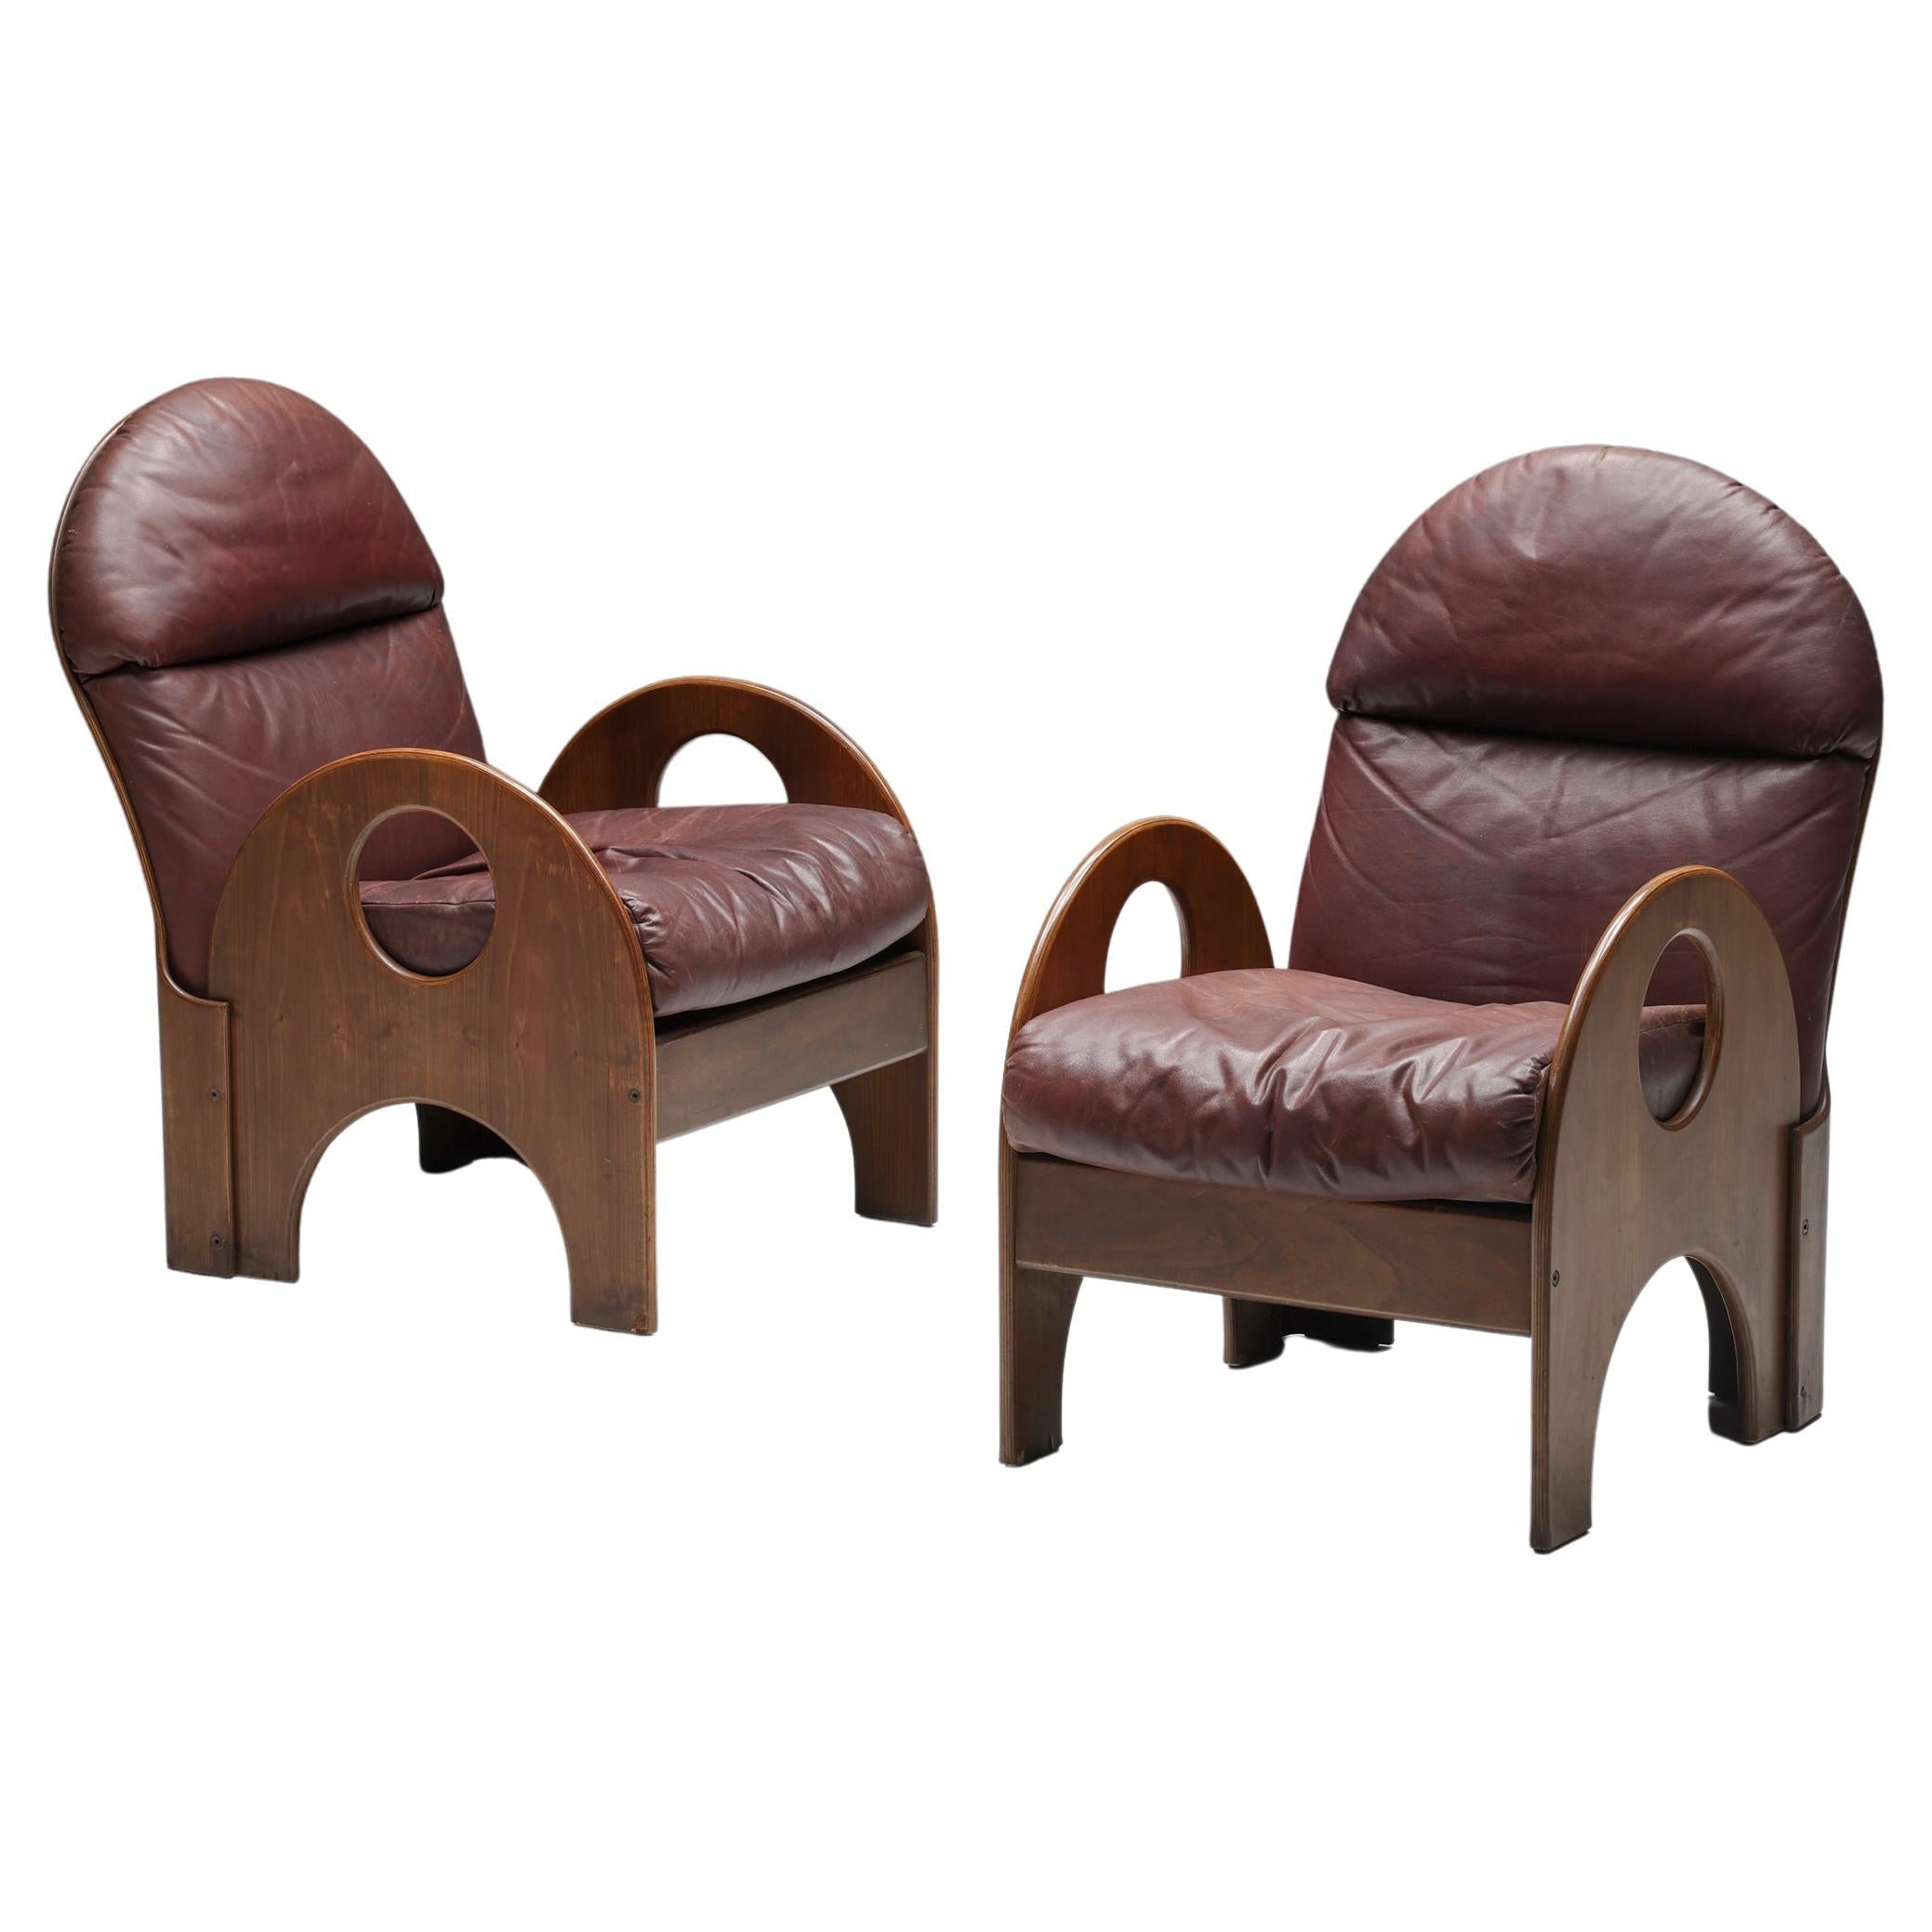 Gae Aulenti Arcata Easy Chair in Walnut and Burgundy Leather, 1960s For Sale